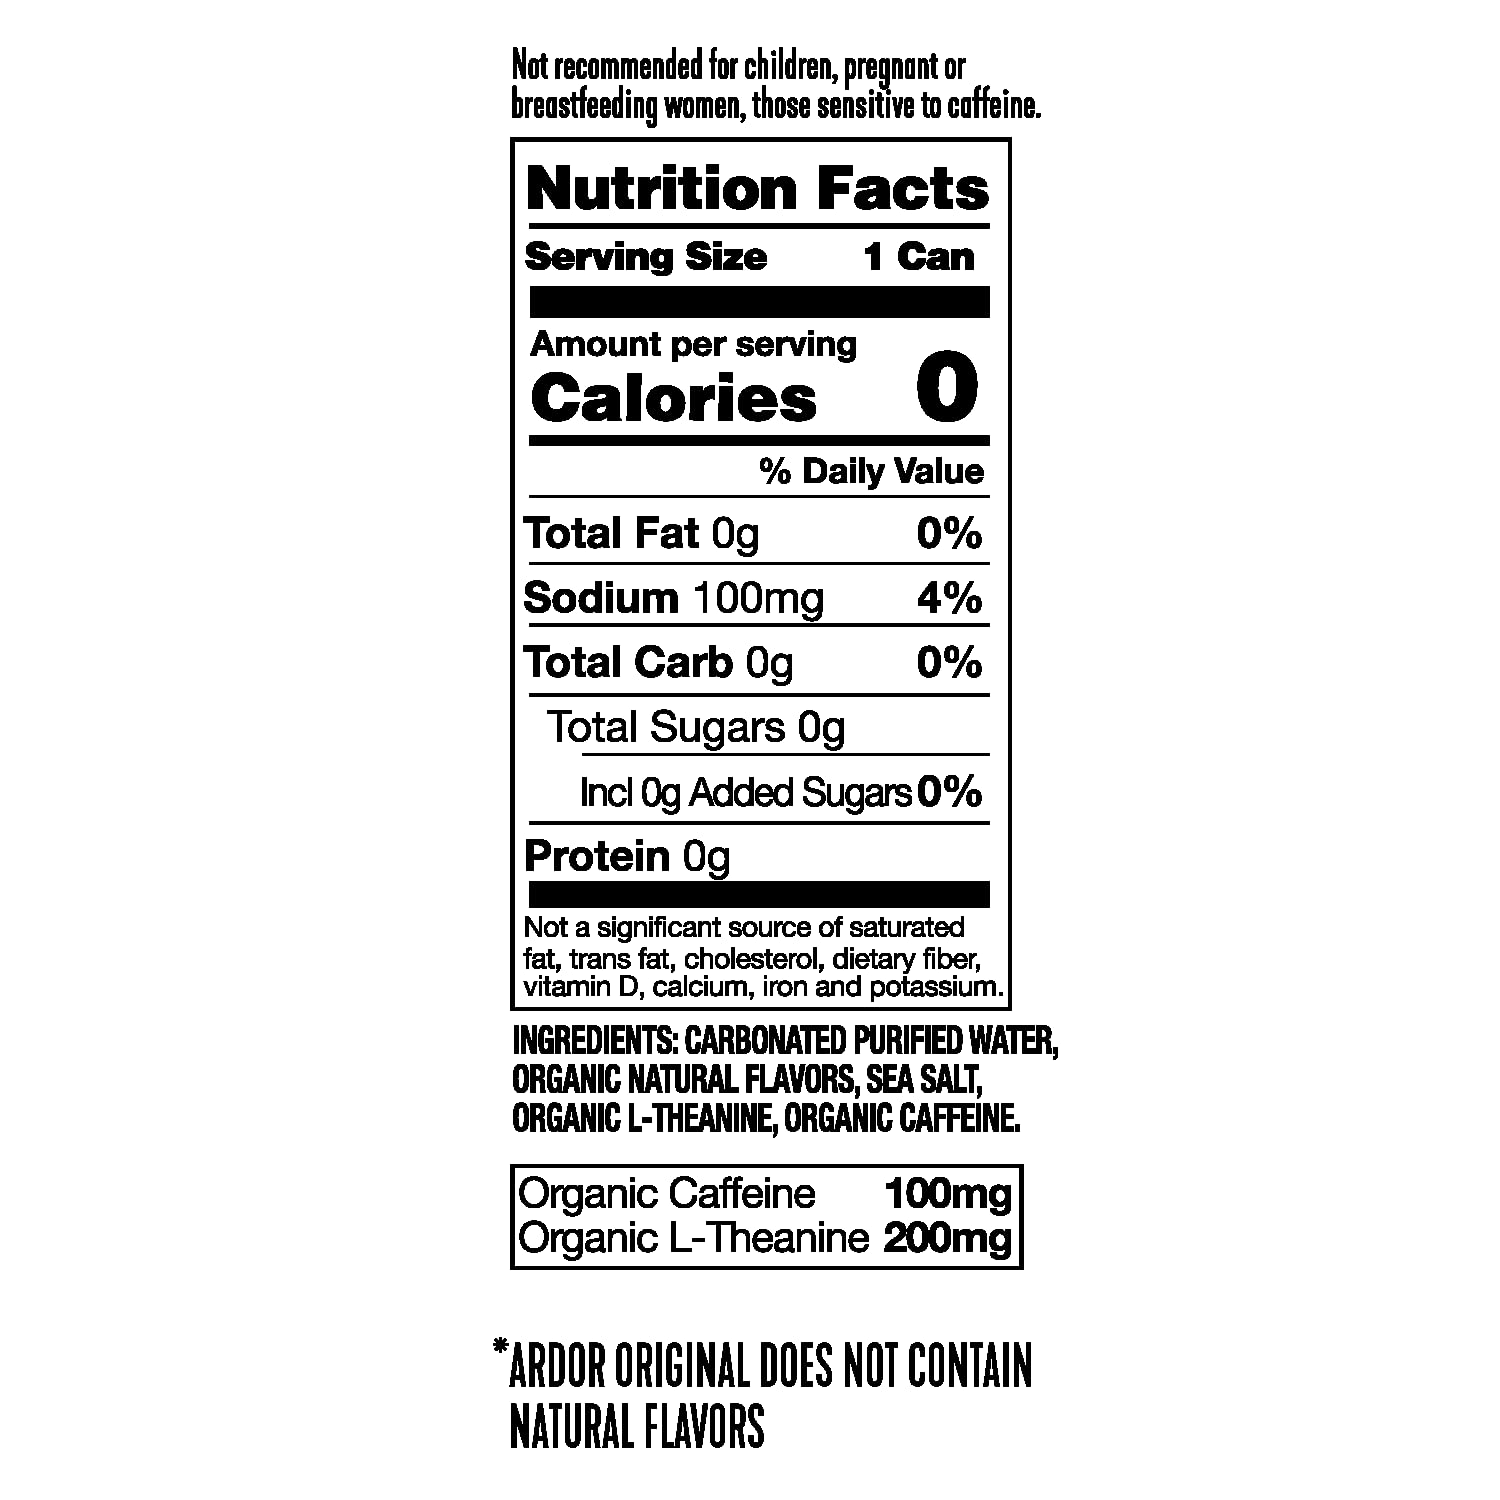 ARDOR organic sparkling water in peach flavor Nutrition Facts chart